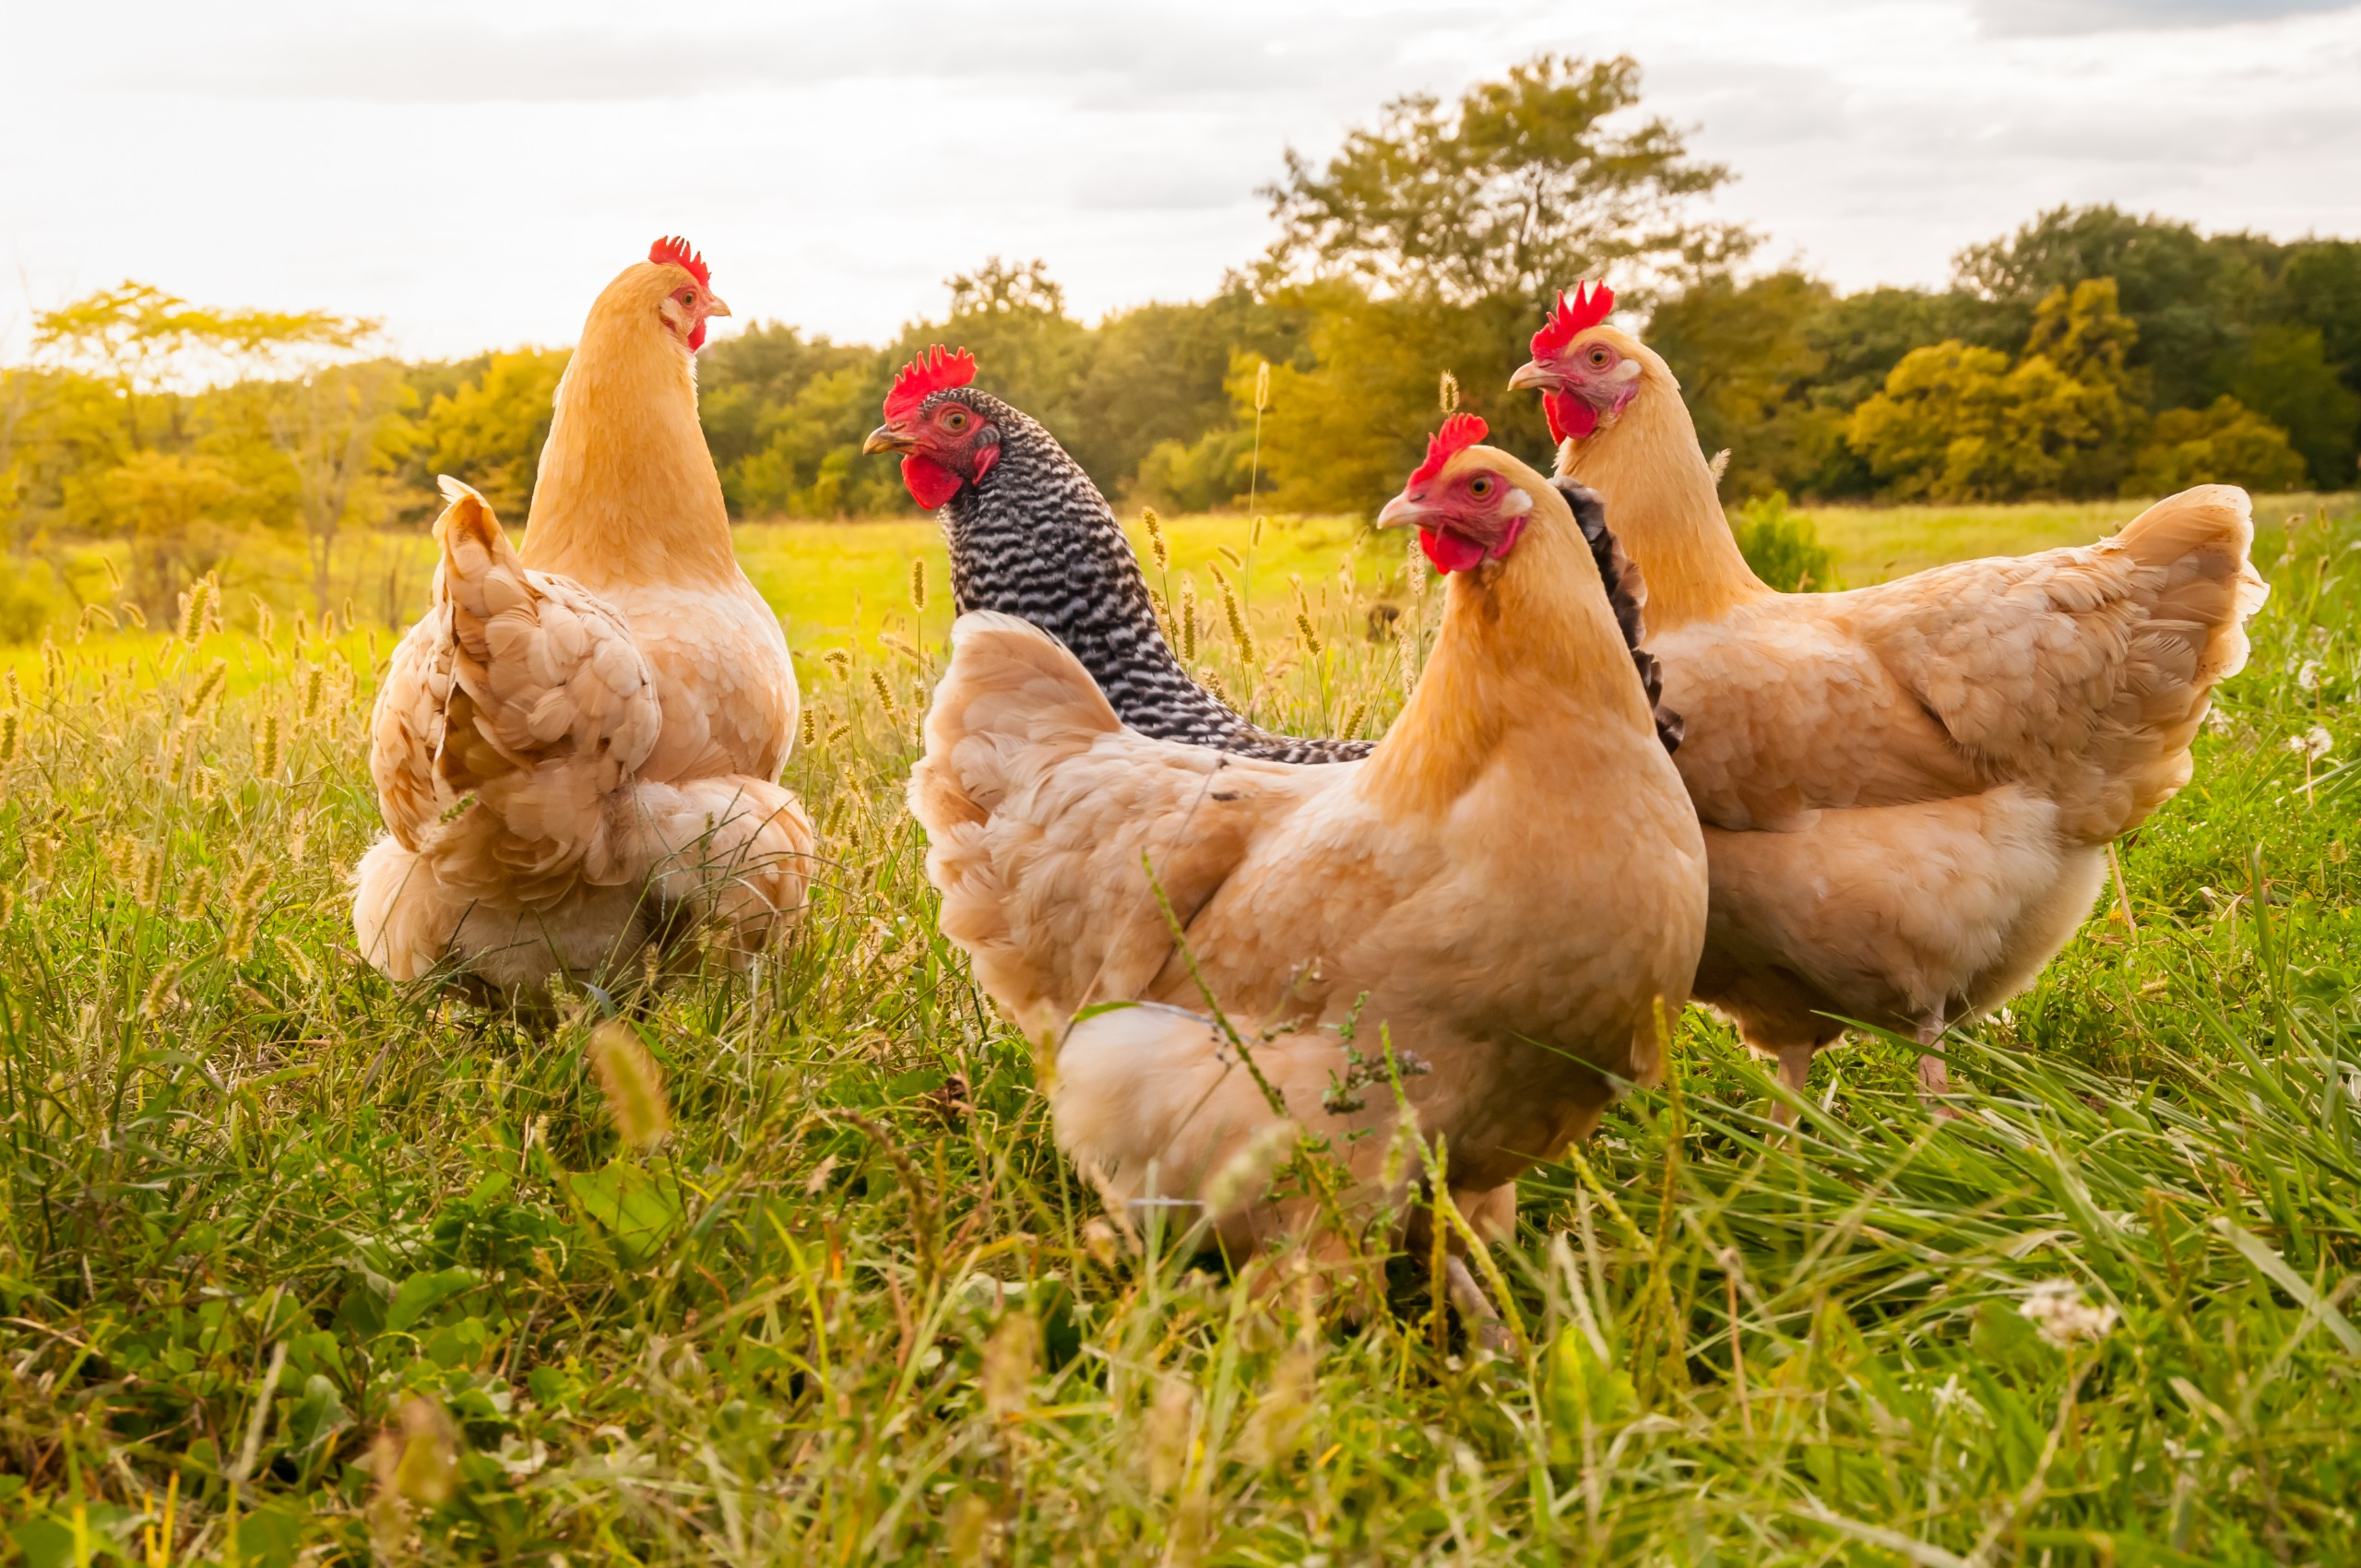 Group of hens in a field